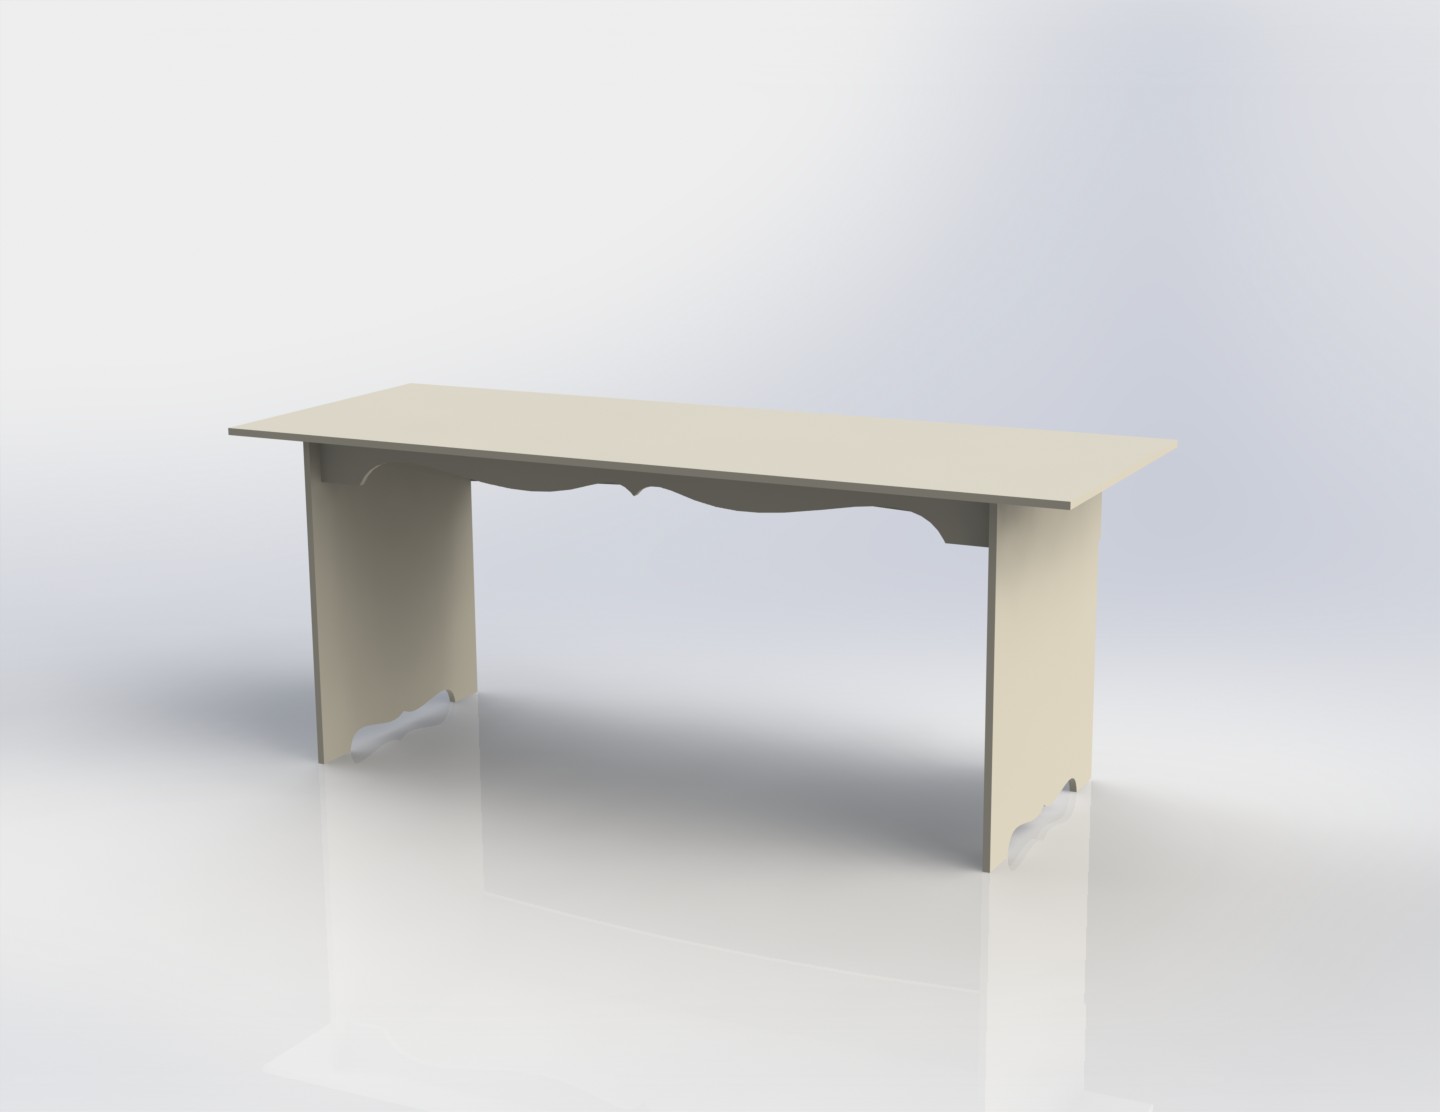 Bench or Table Style dxf file